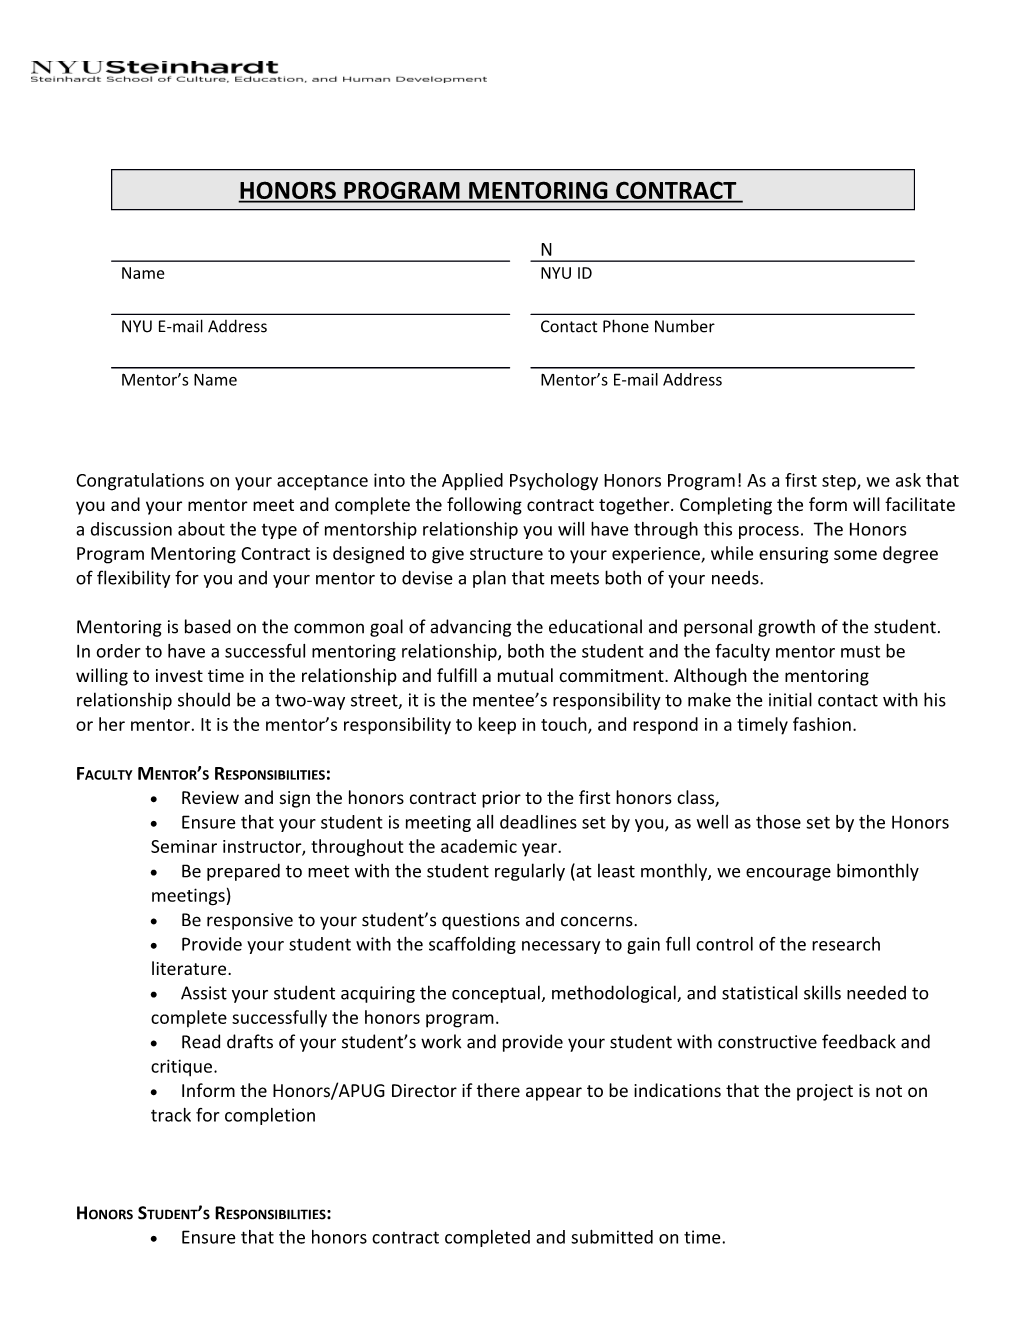 Honors Program Mentoring Contract 2009-2010